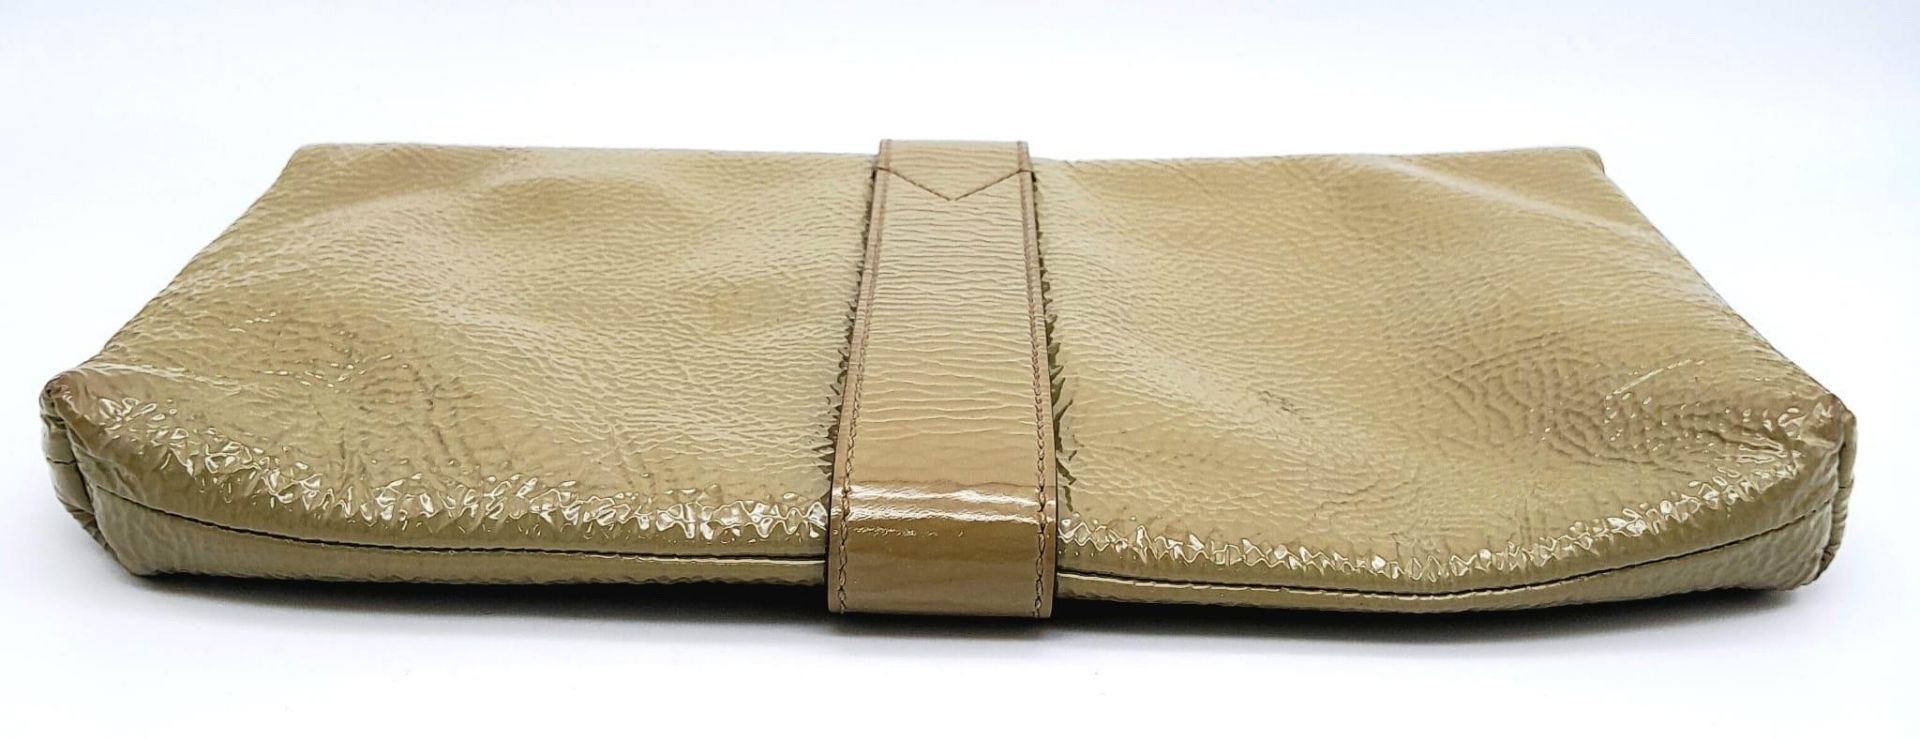 A Mulberry Harriet Khaki Leather Clutch Bag. Spongy patent leather exterior with gold-tone hardware, - Bild 3 aus 10